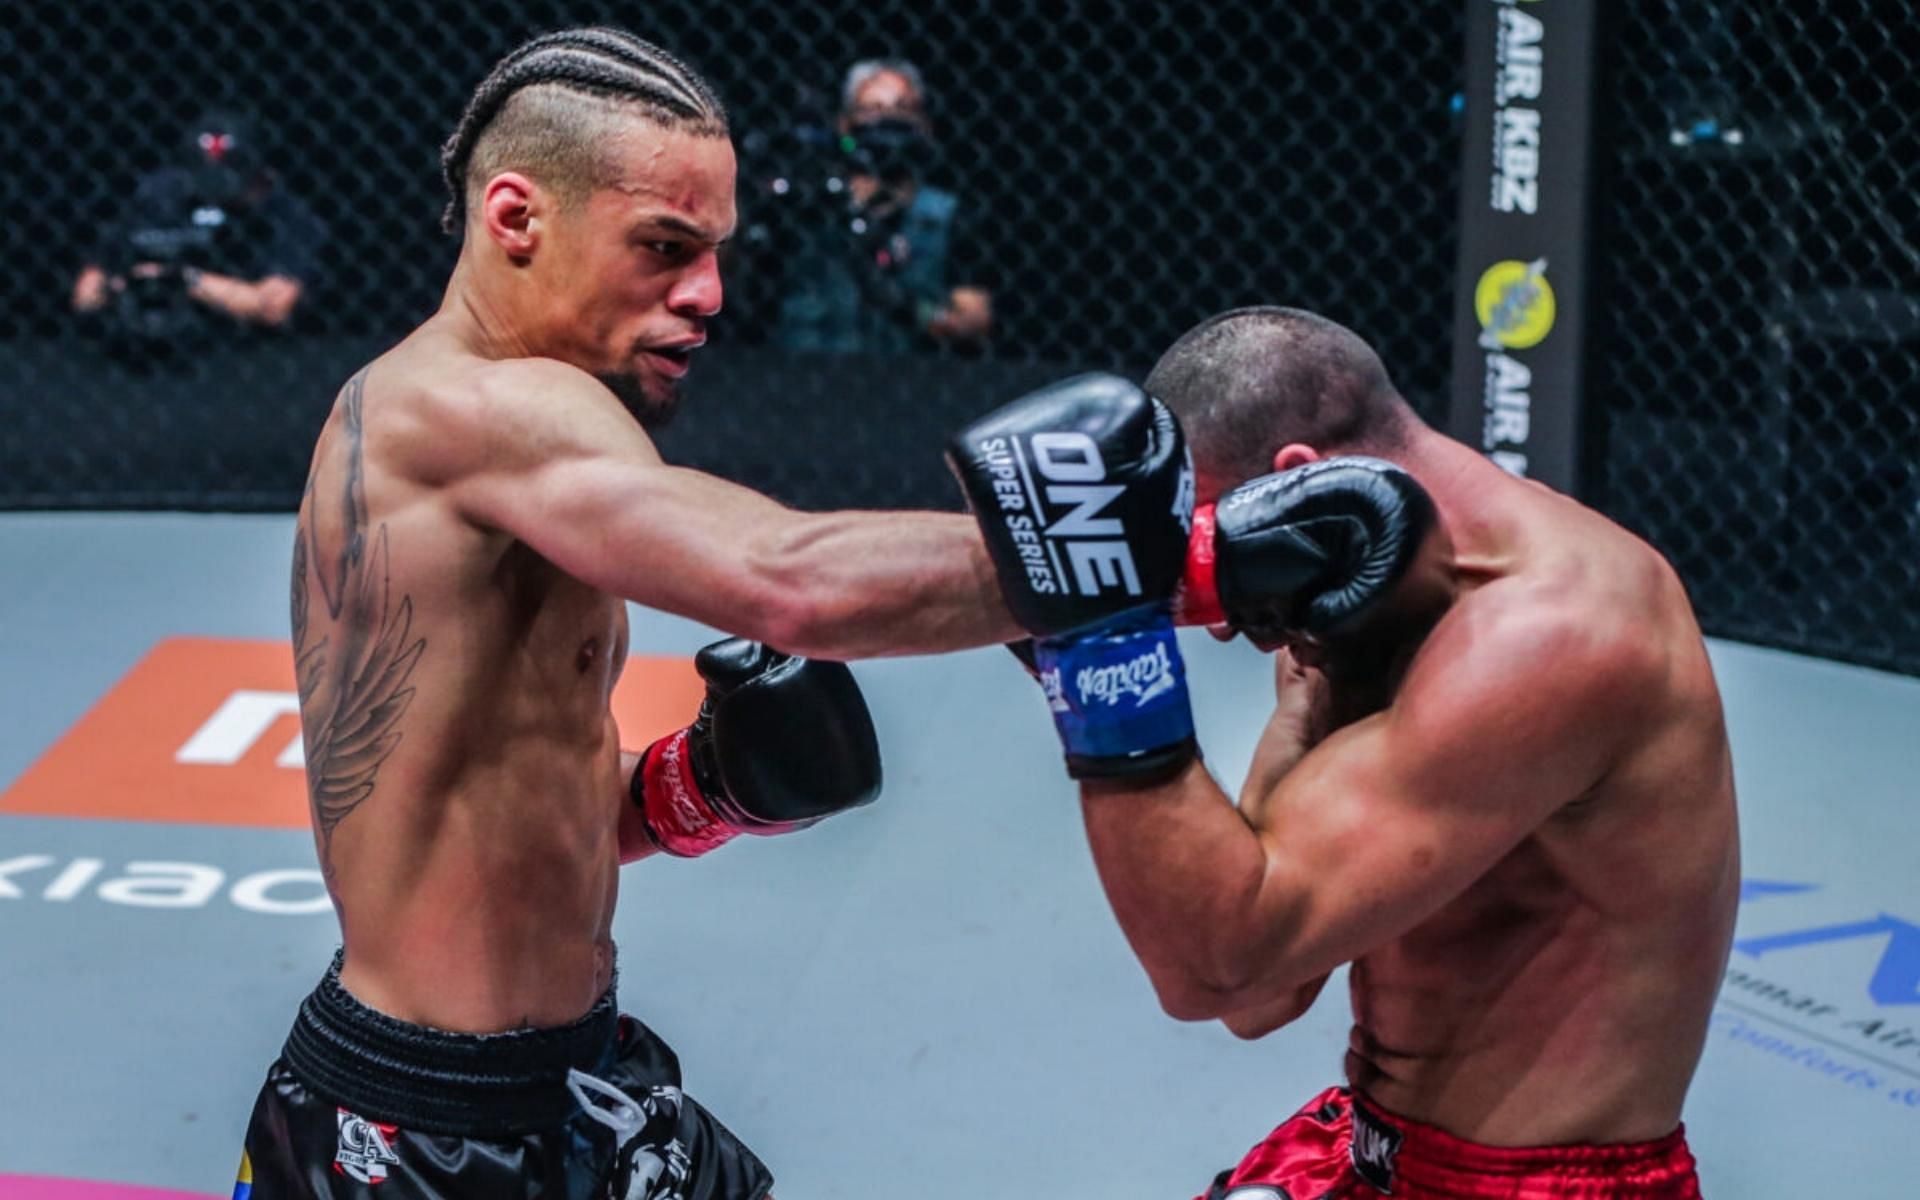 ONE lightweight kickboxing champion Regian Eersel (left) destroyed #2 ranked Mustapha Haida (right) at ONE Championship: Fists of Fury 3 (Image courtesy of ONE Championship)